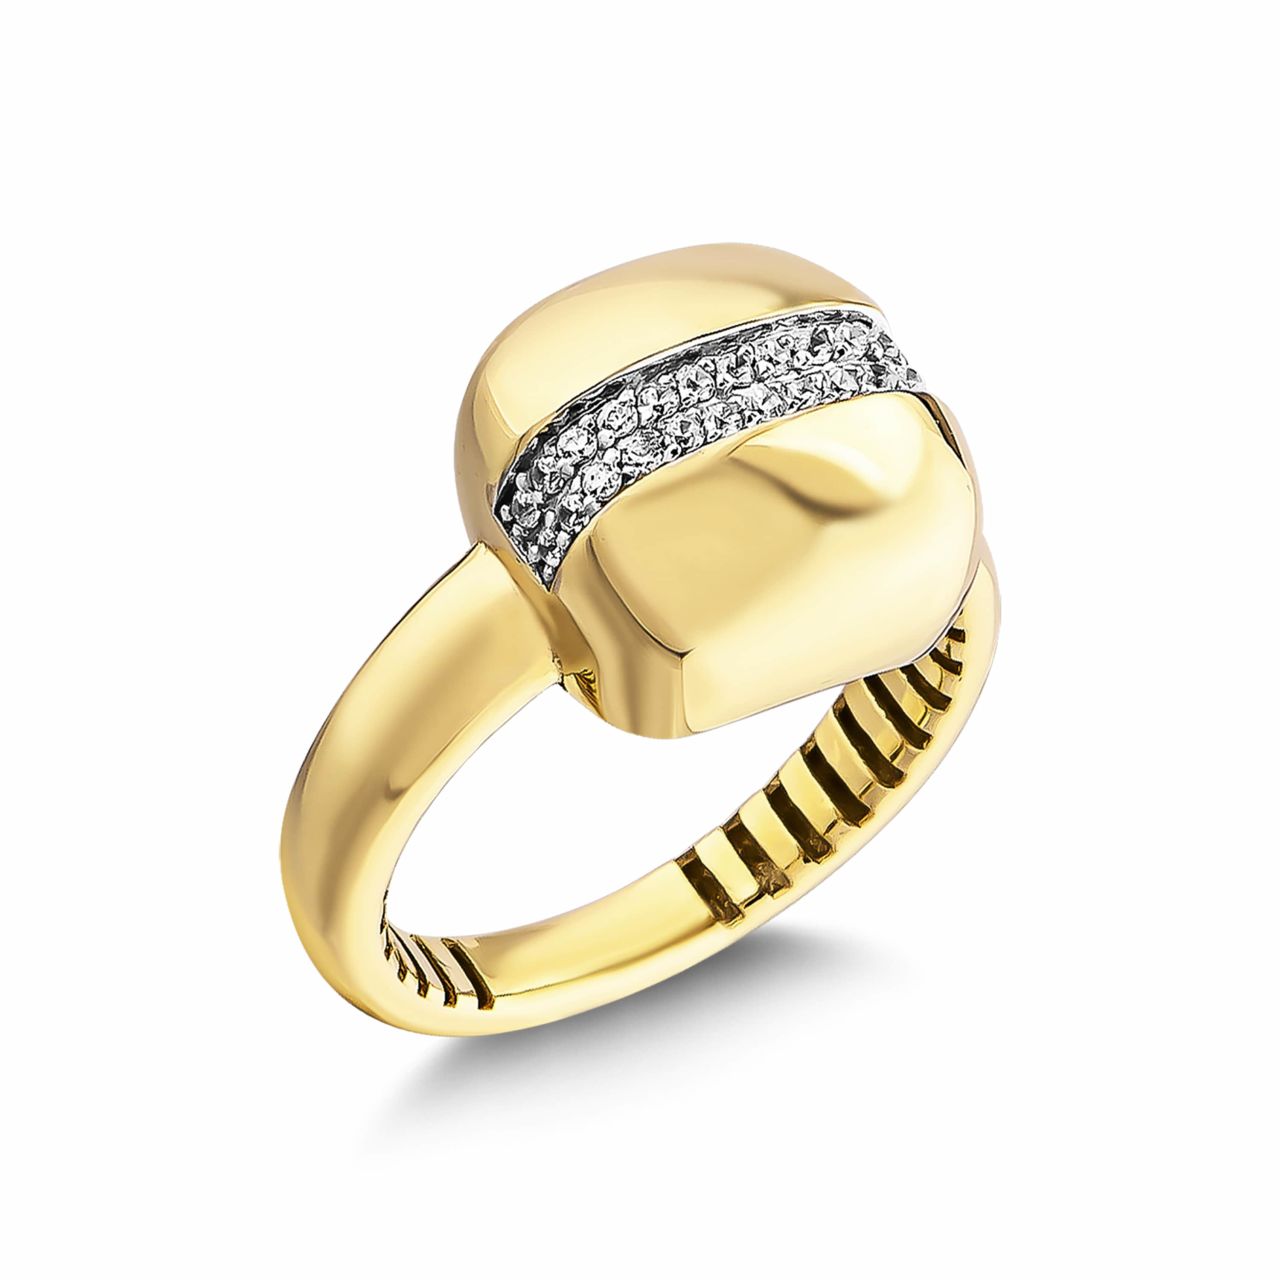 TY 2071 is 3.80 g Gold Ring